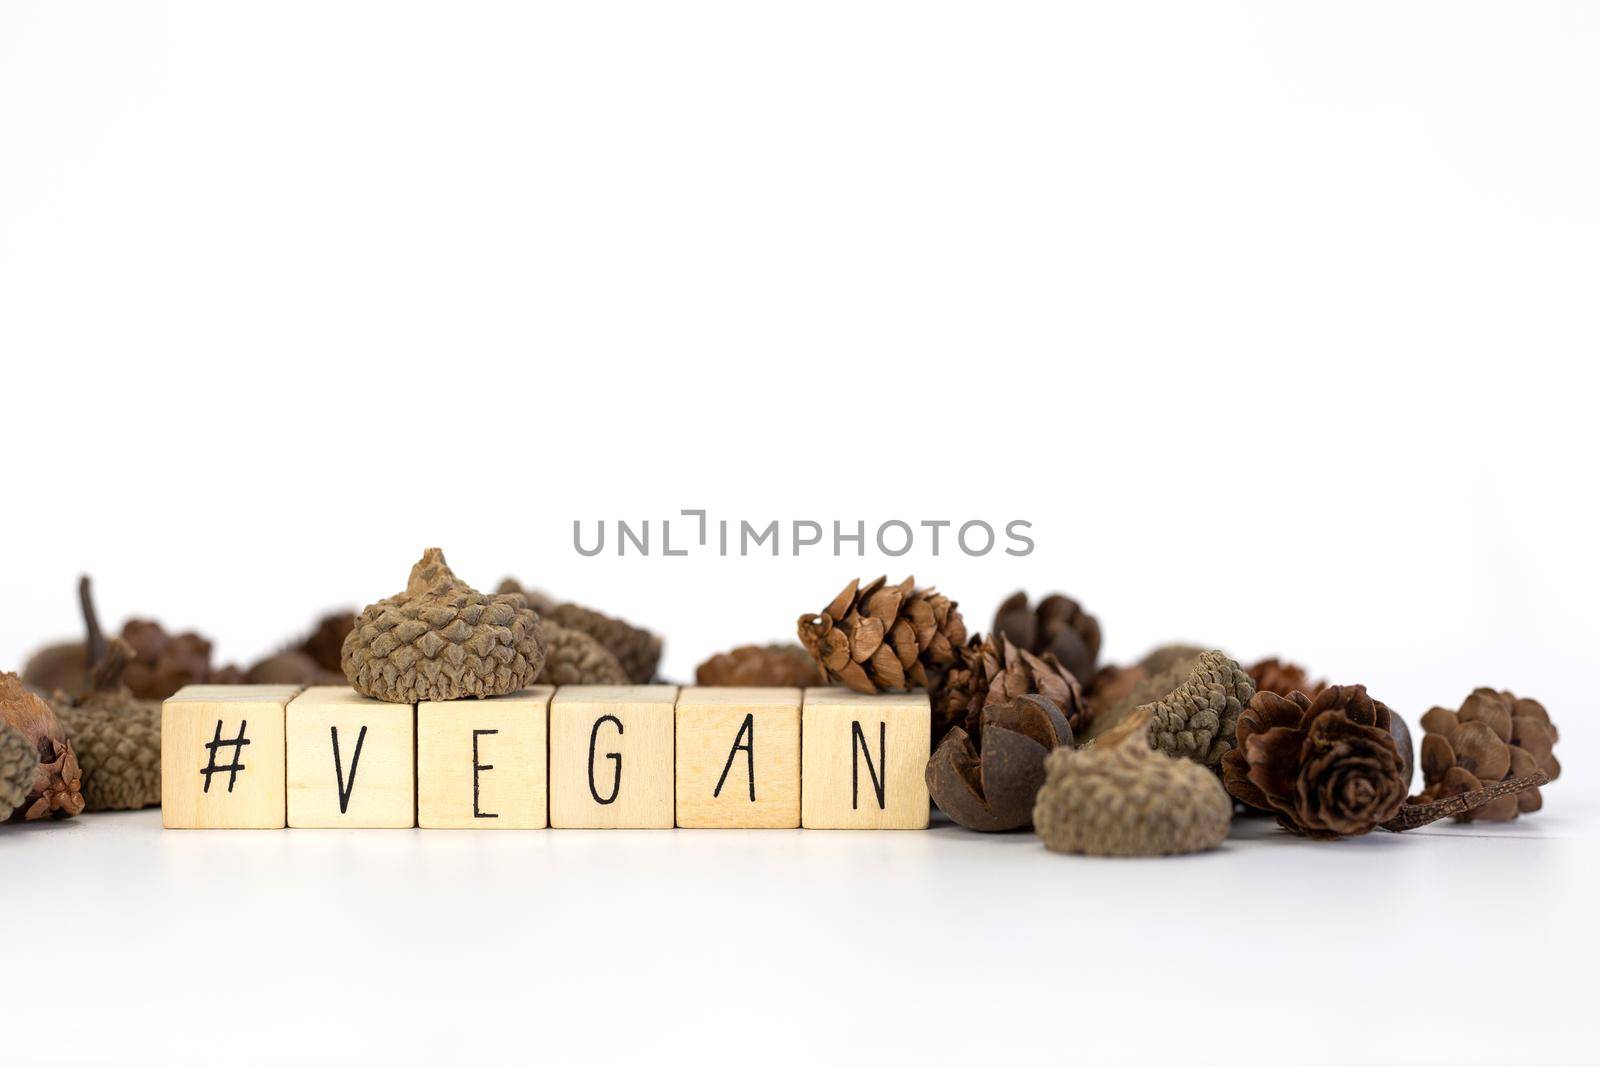 Vegan and hashtag written with wooden cubes and nature decoration isolated on white background with copy space, vegan,vegetarian,health concept background modern design natural style close up